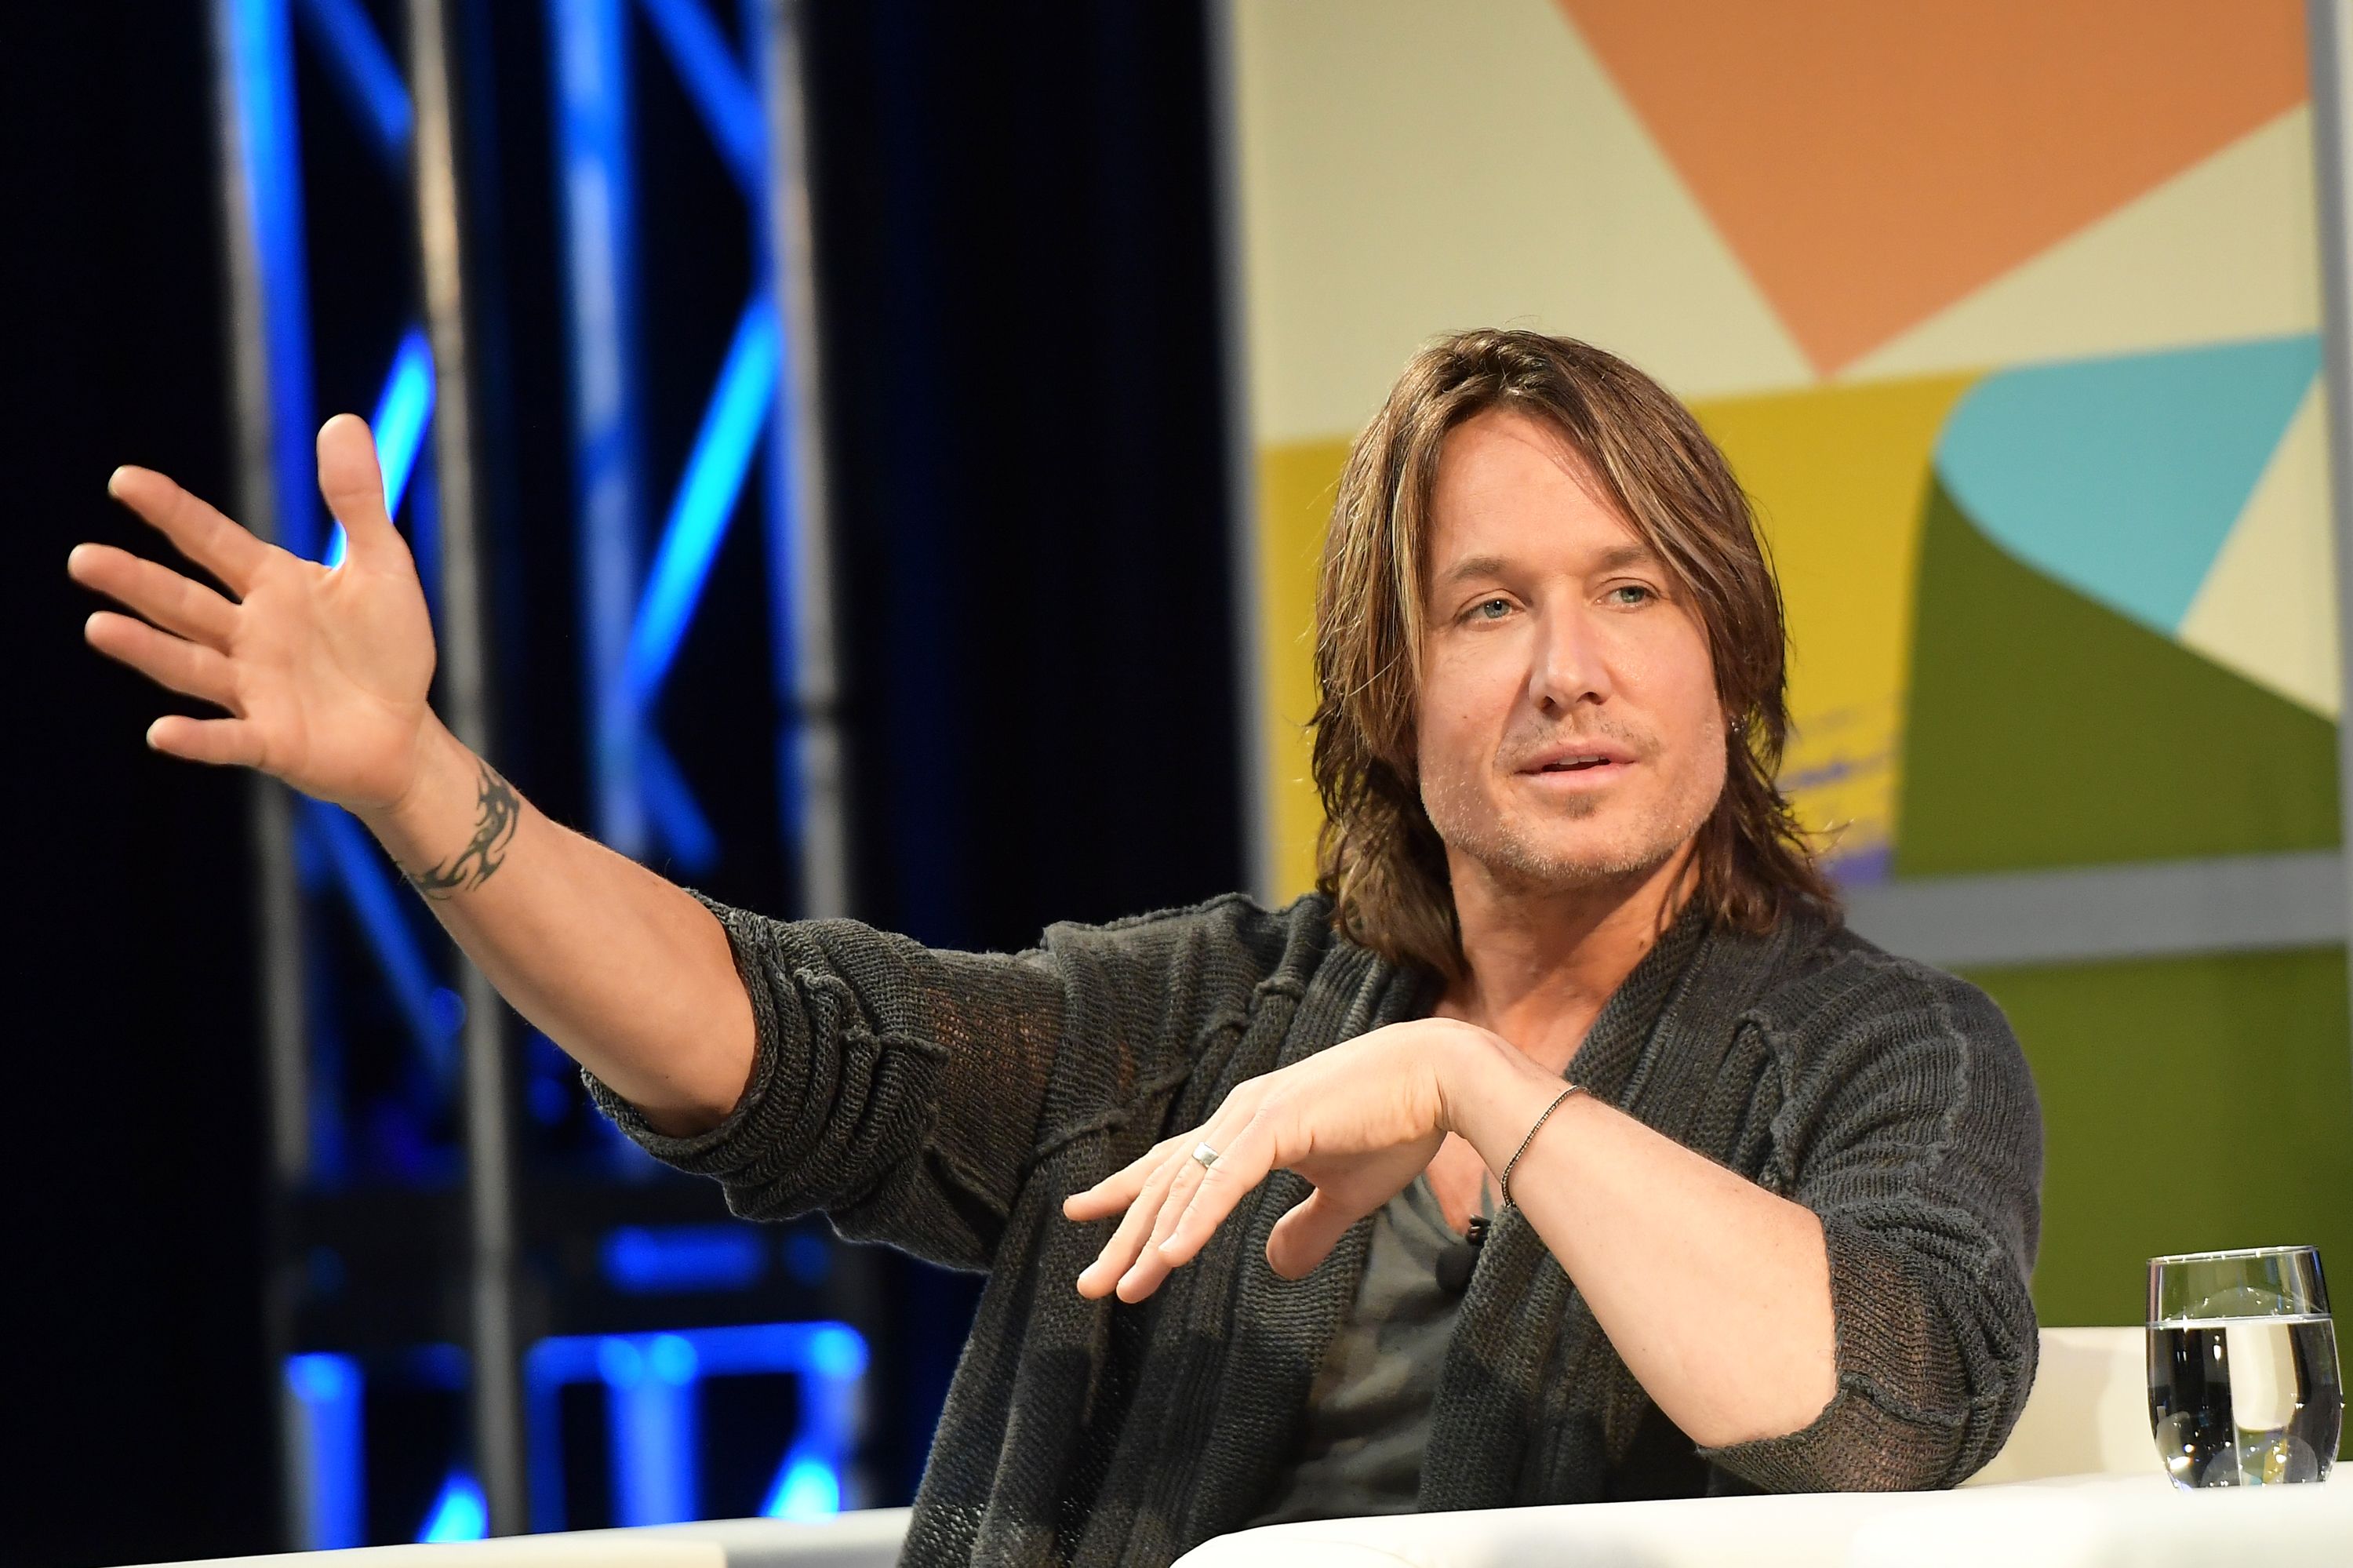 Keith Urban at A Conversation with Keith Urban 2018 SXSW Conference and Festivals at Austin Convention Center on March 16, 2018 | Photo: Getty Images